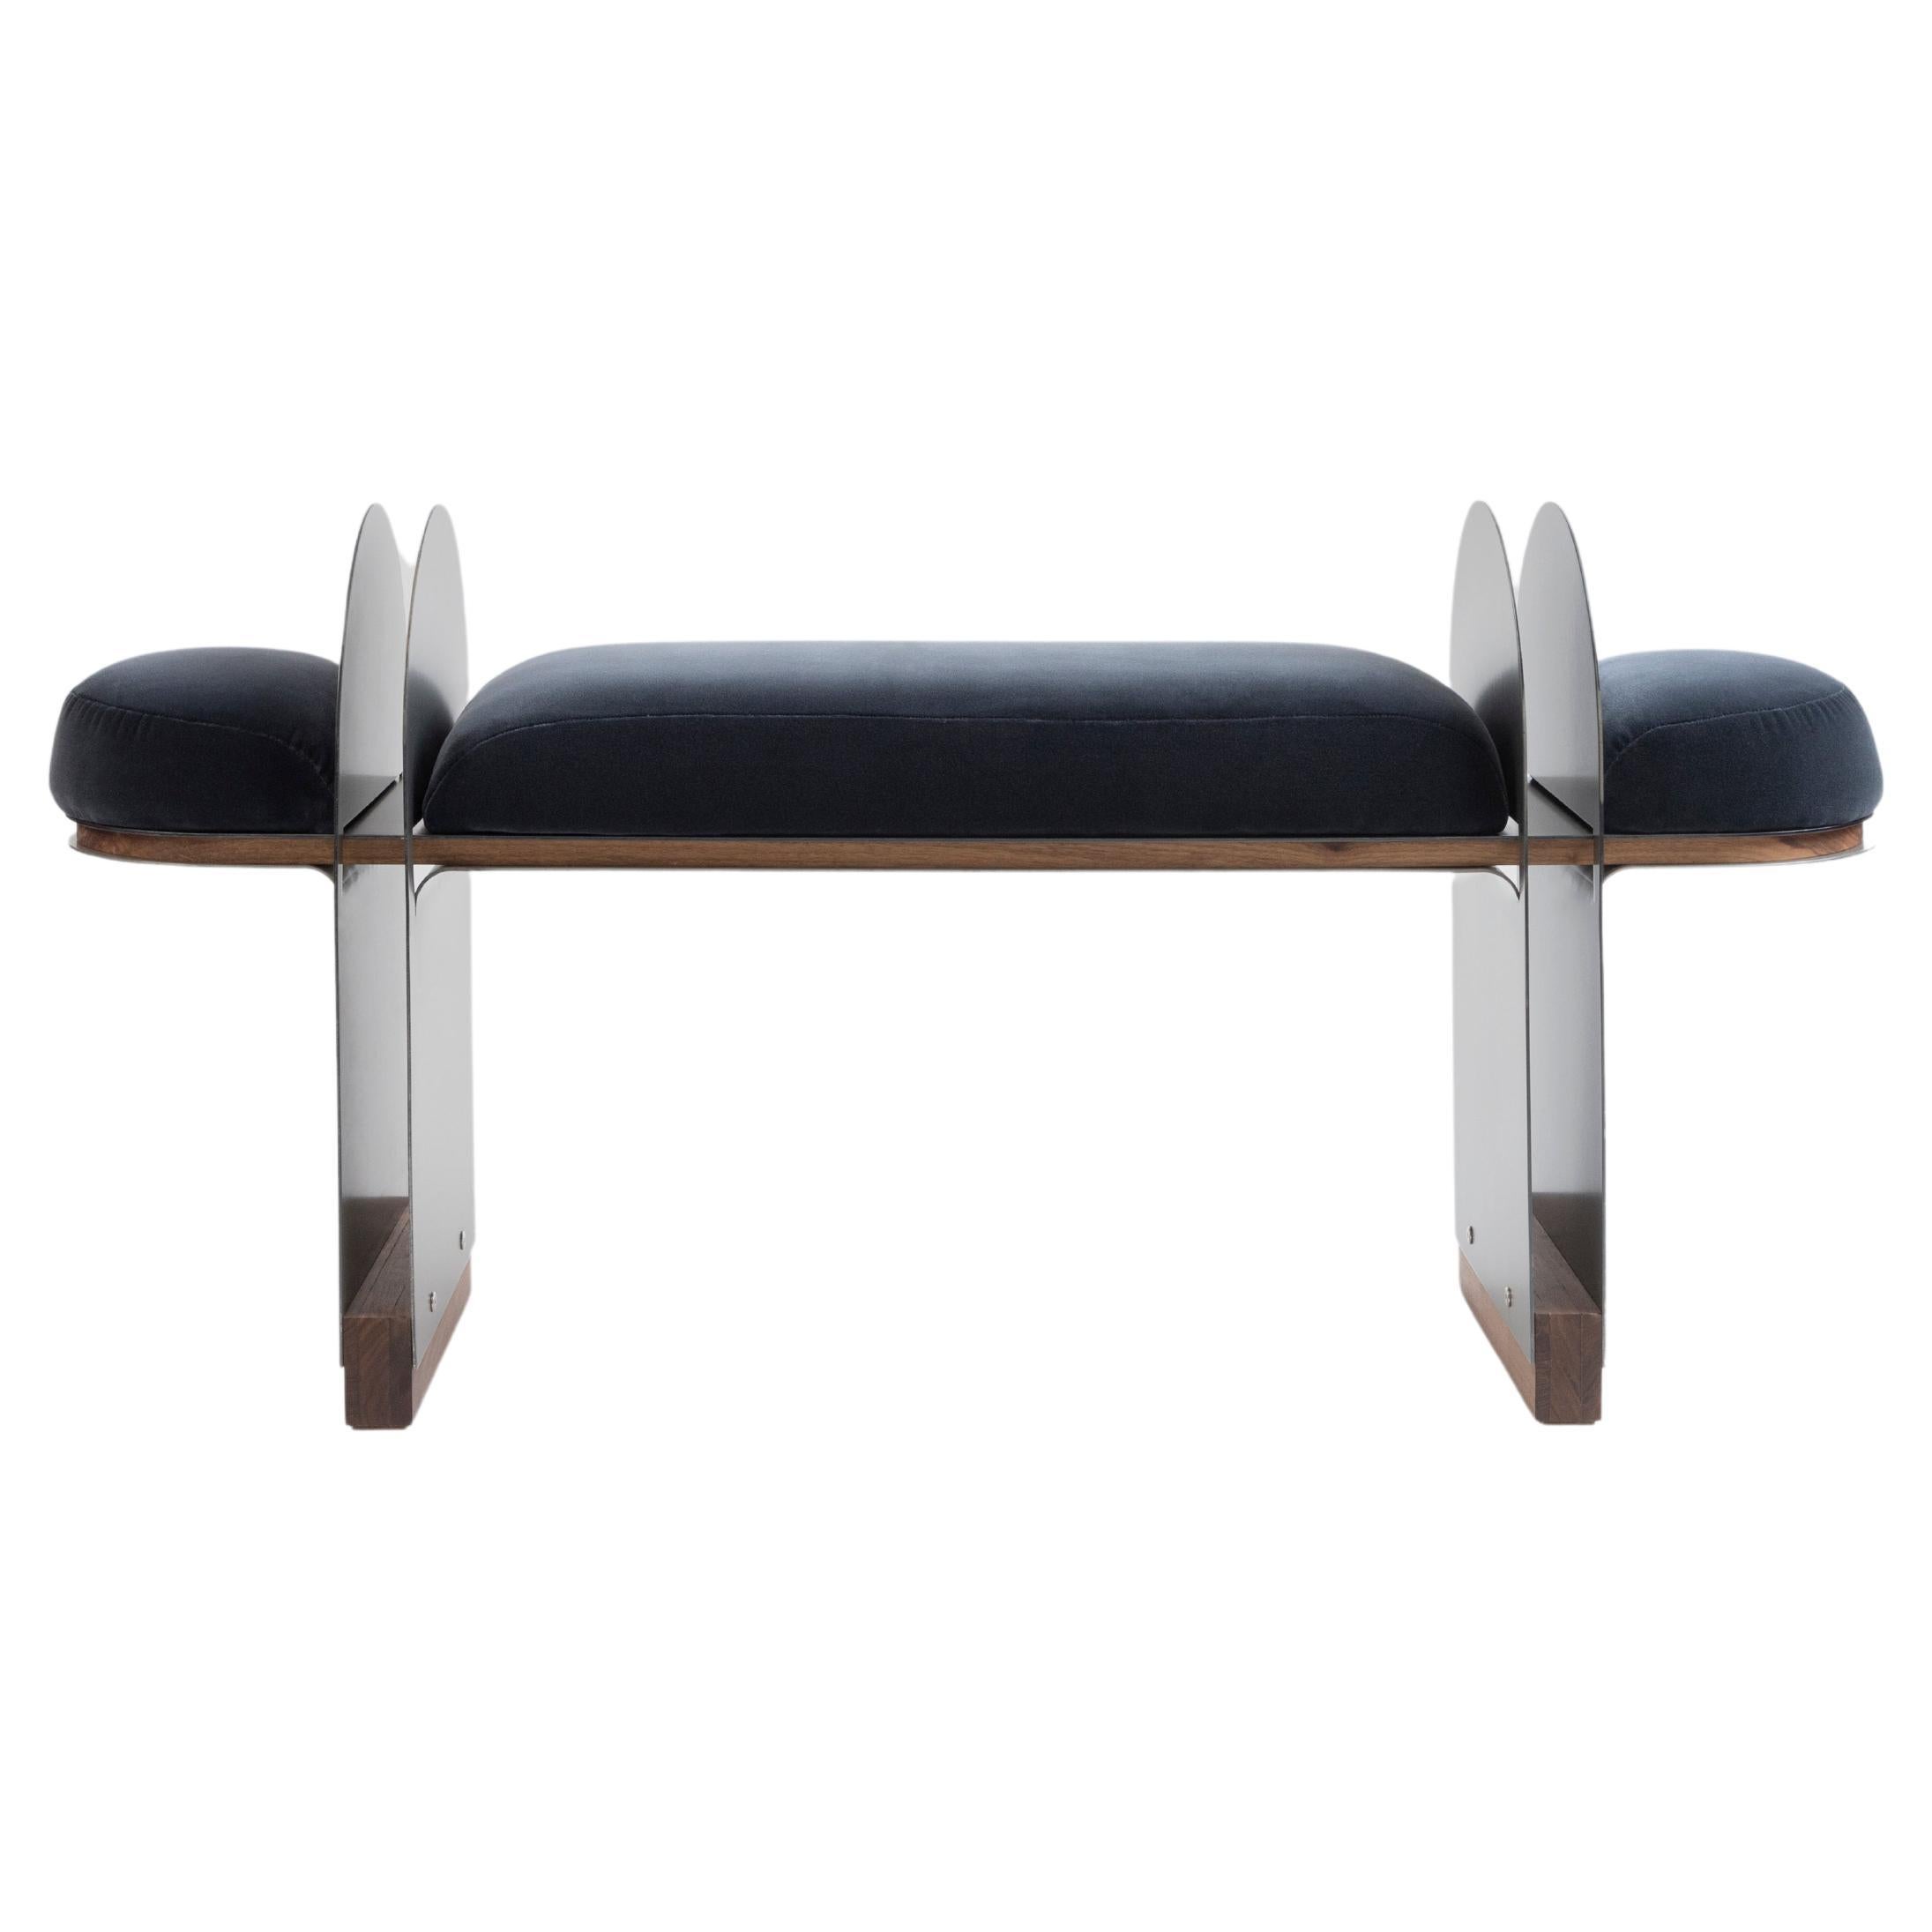 Contemporary Steel, Walnut, and Upholstery NAFIH Bench, by ADHOC For Sale